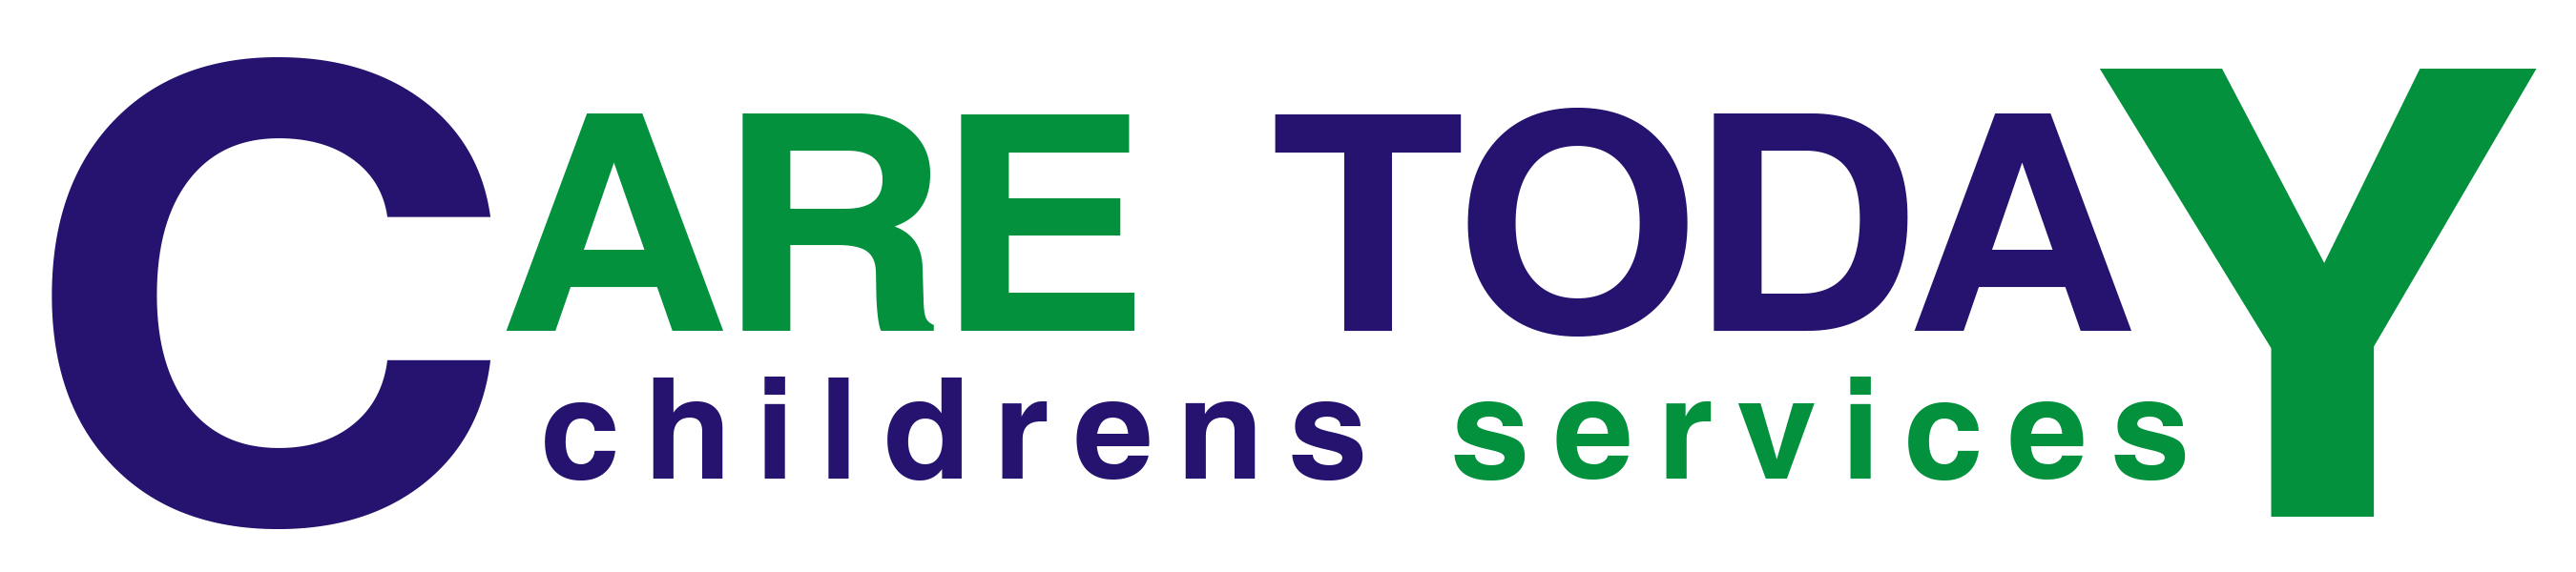 Care Today (Children's Services)